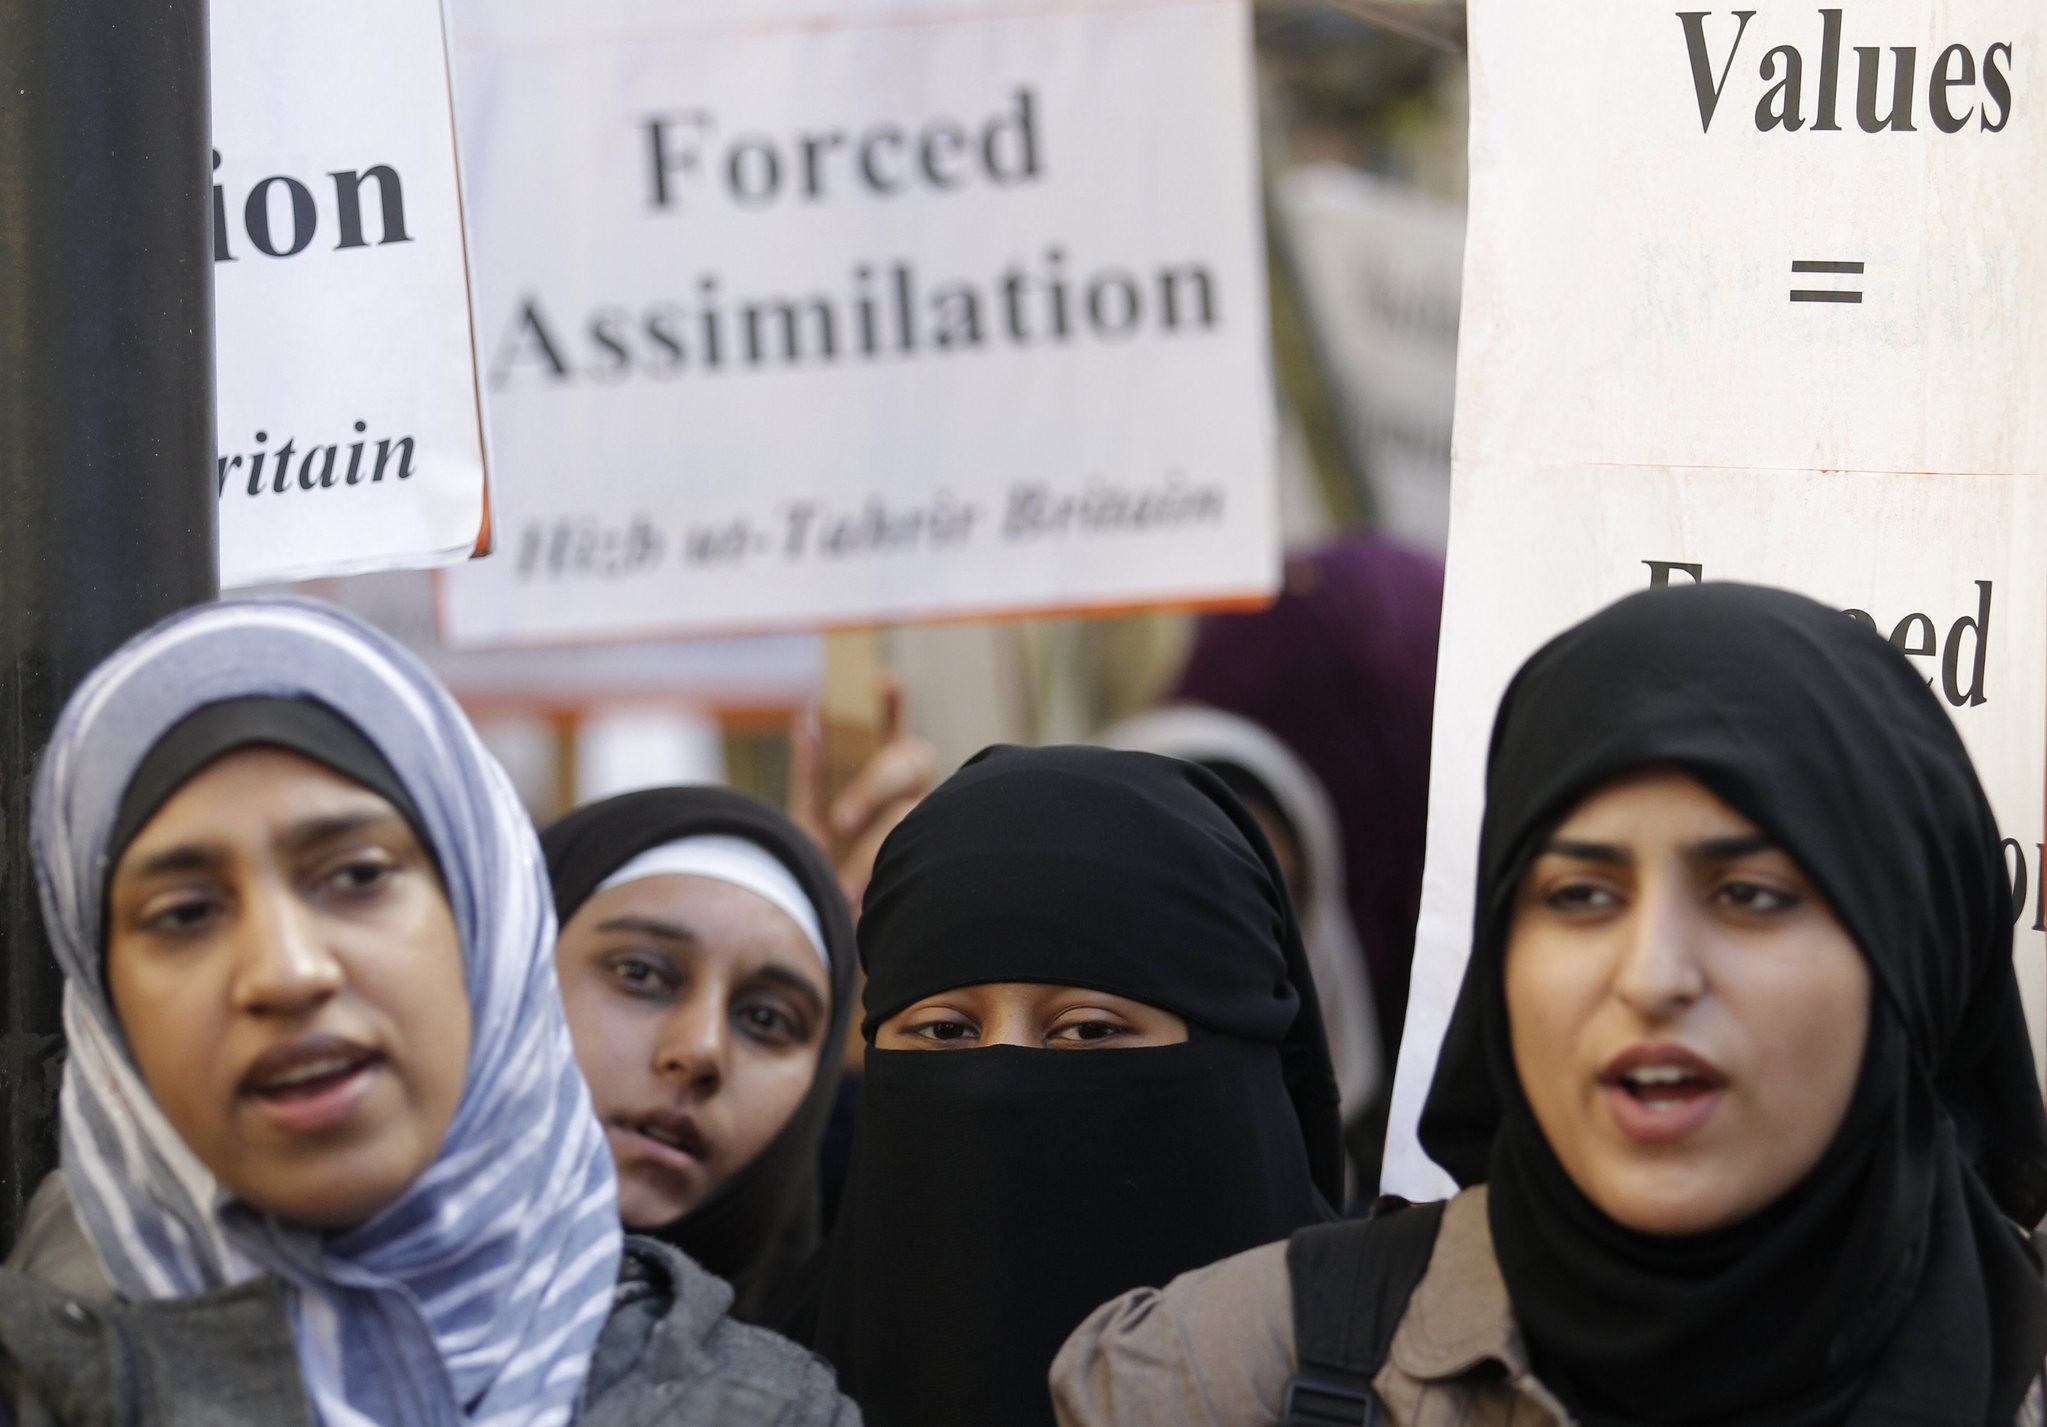 Muslim woman take part in a demonstration by the Islamic political party Hizb ut-Tahrir against France's banning of full face veils from public spaces, outside the French Embassy in London September 25, 2010.  ()